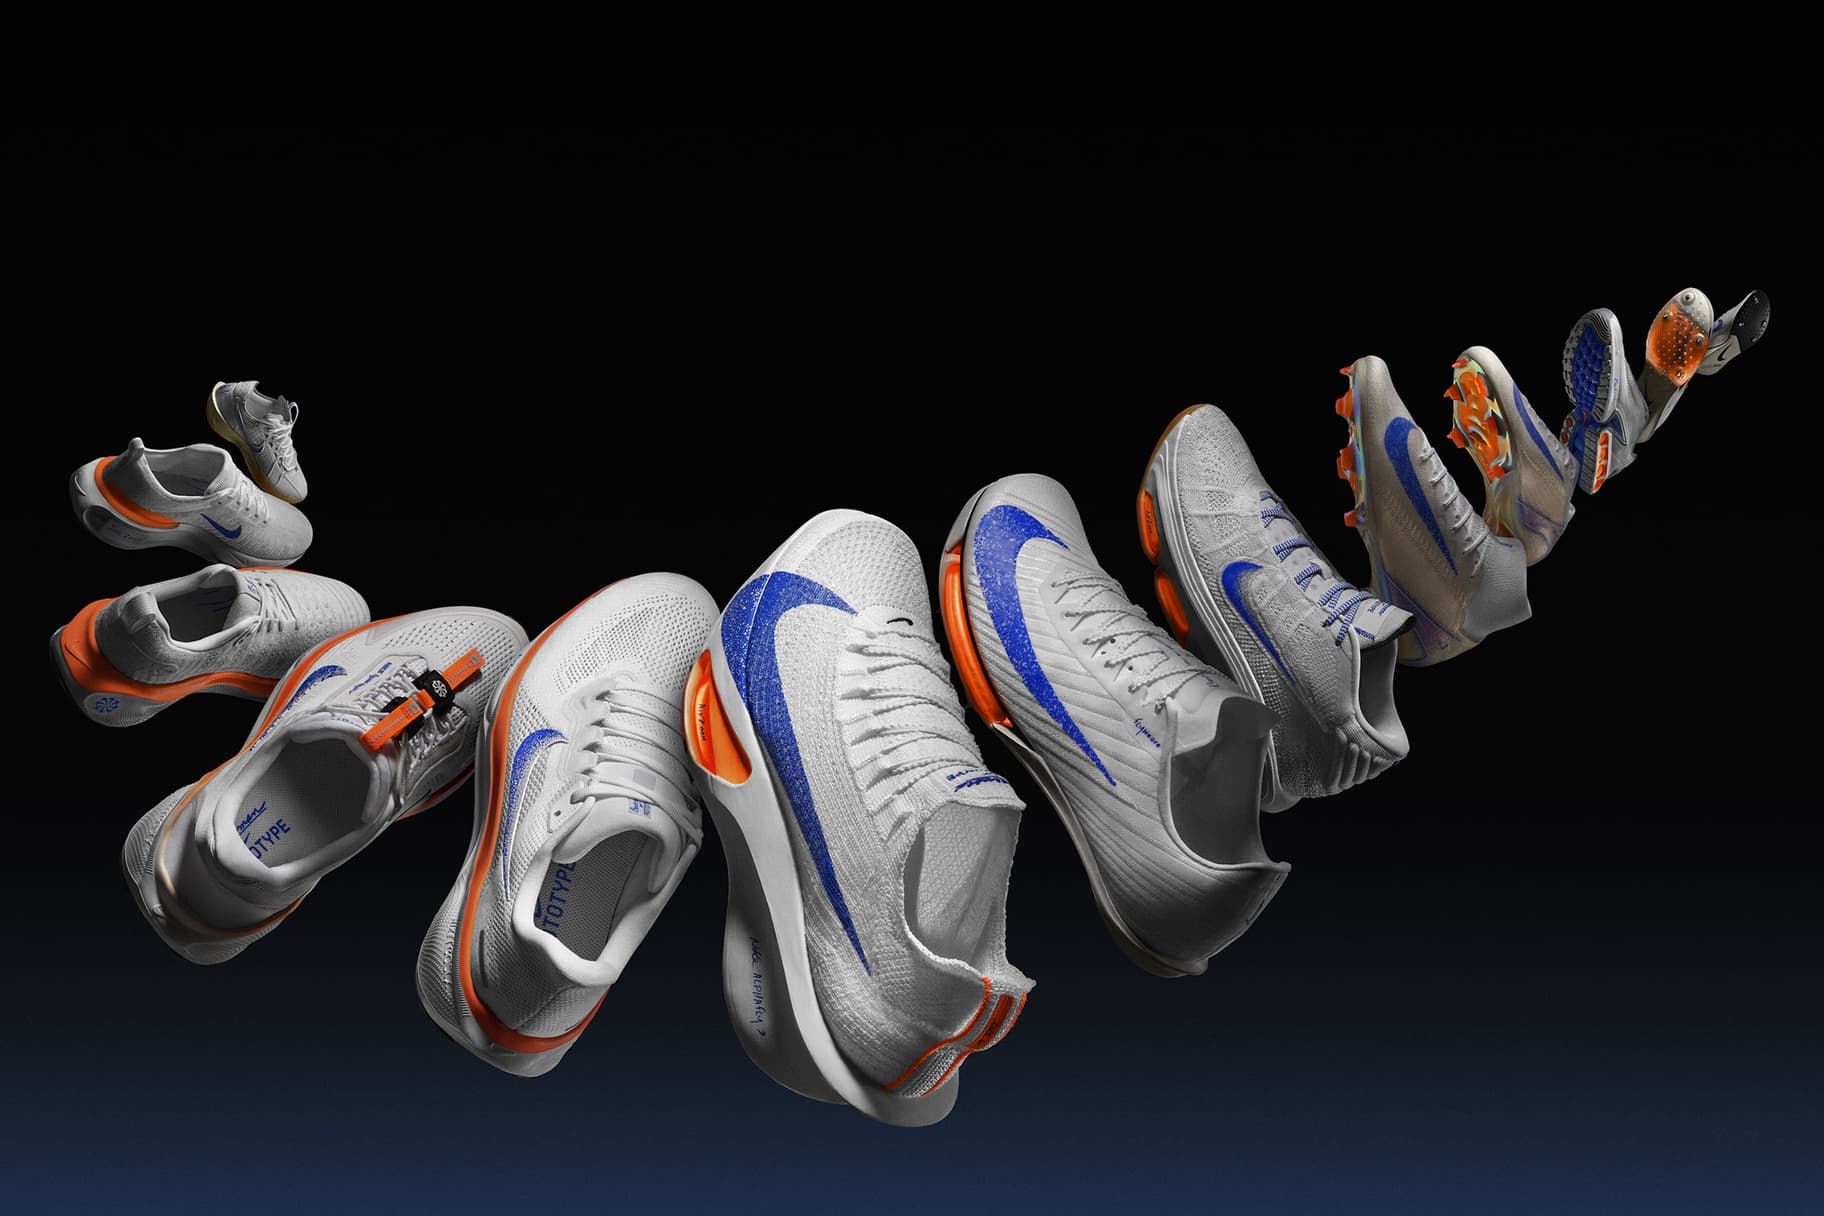 Nike’s Best Air-Powered Products on Display in Blueprint Pack